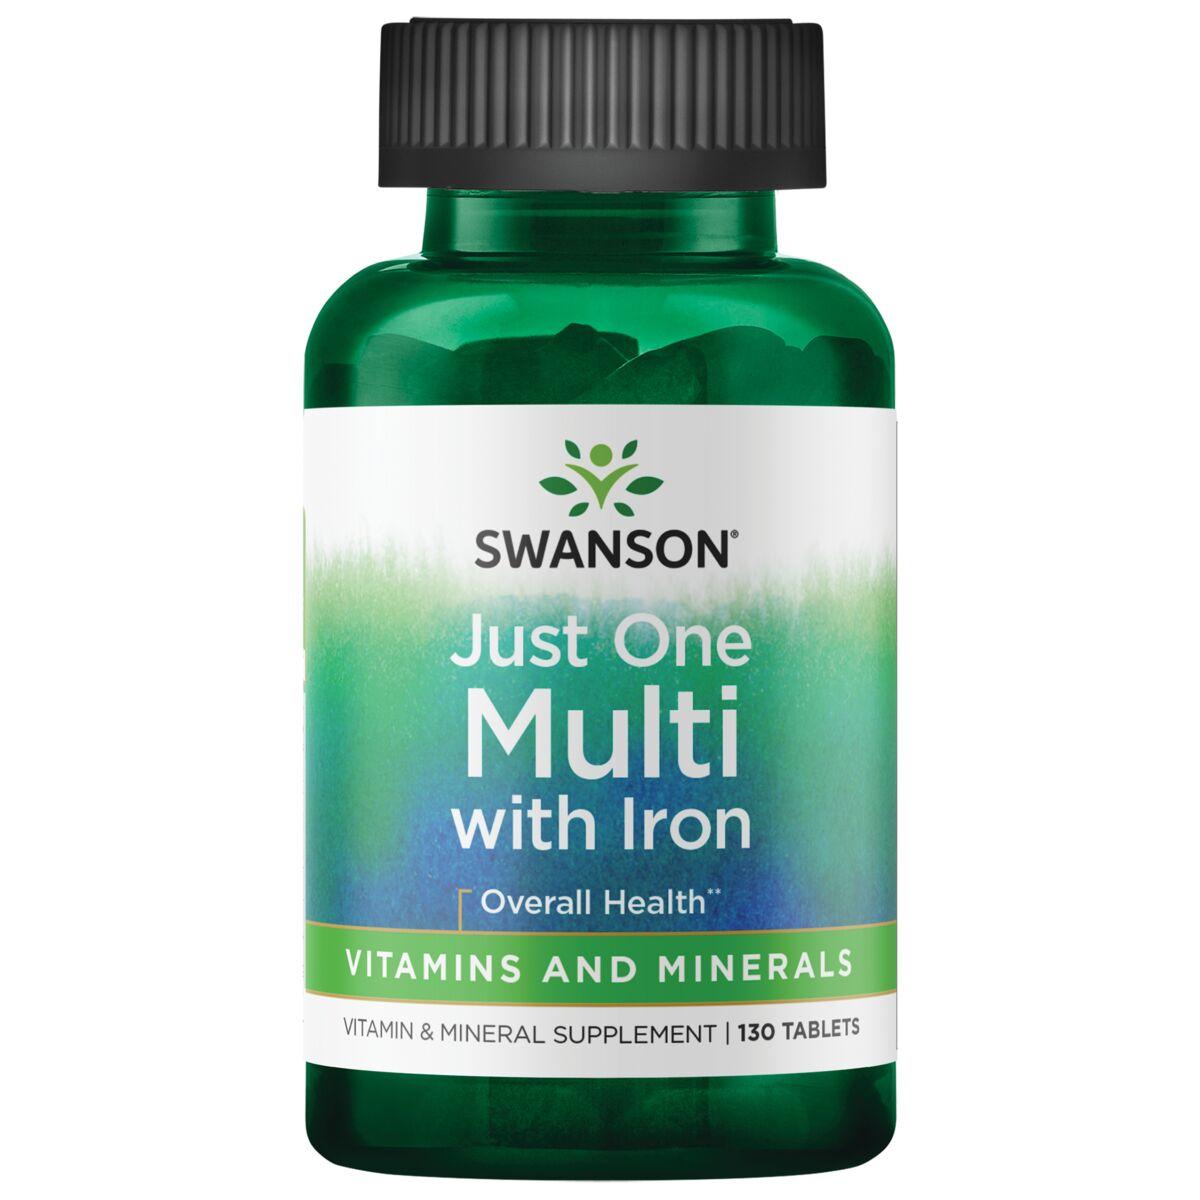 Swanson Premium Just One Complete Multi - With Iron Vitamin 130 Tabs